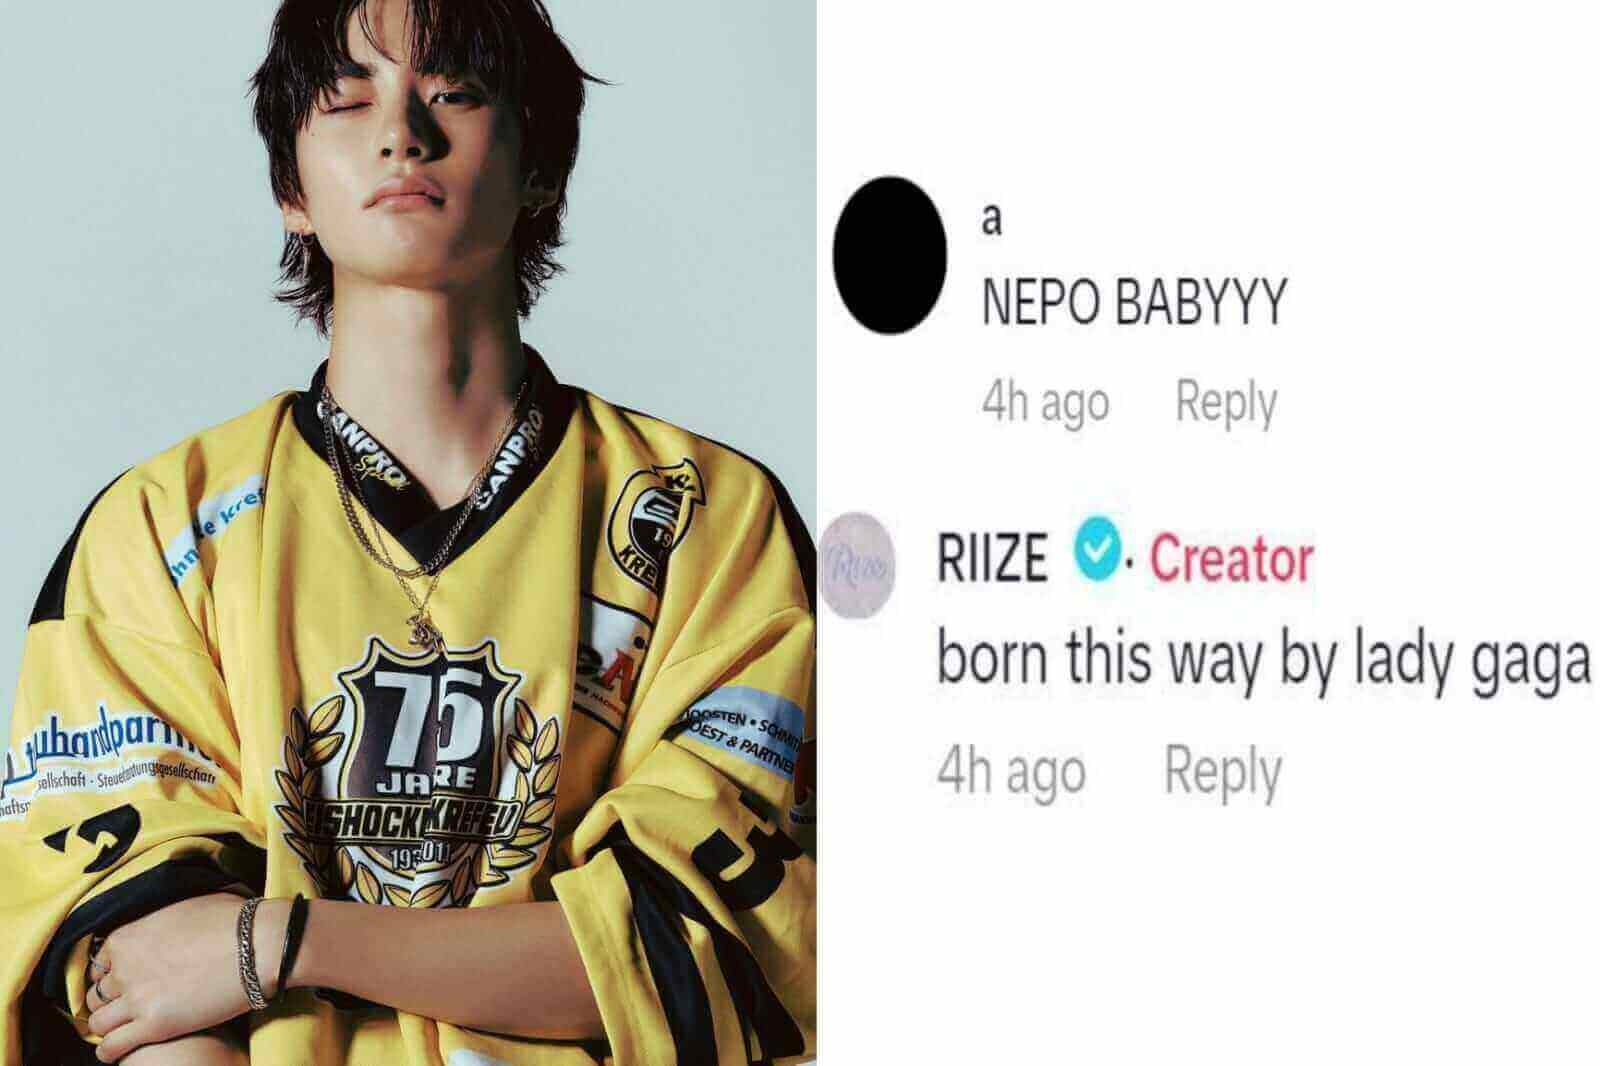 RIIZE's Anton Sparks Internet Frenzy with Epic Retort to 'Nepo Baby' Remark